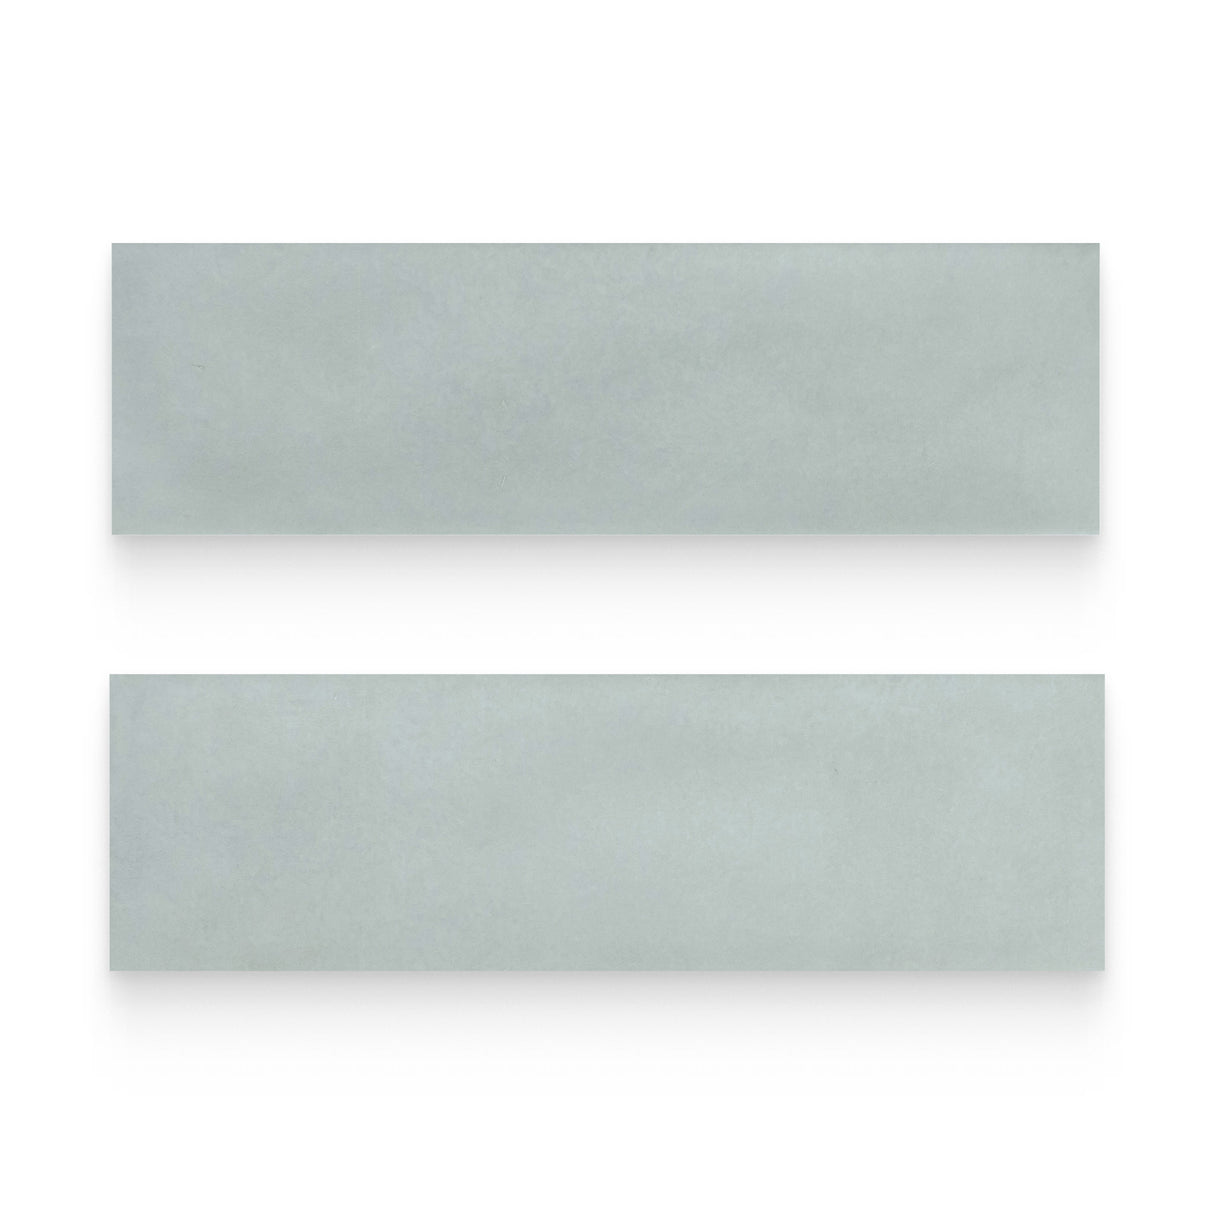 Country 2.5x8 Cloud Glossy Rectangle Tile